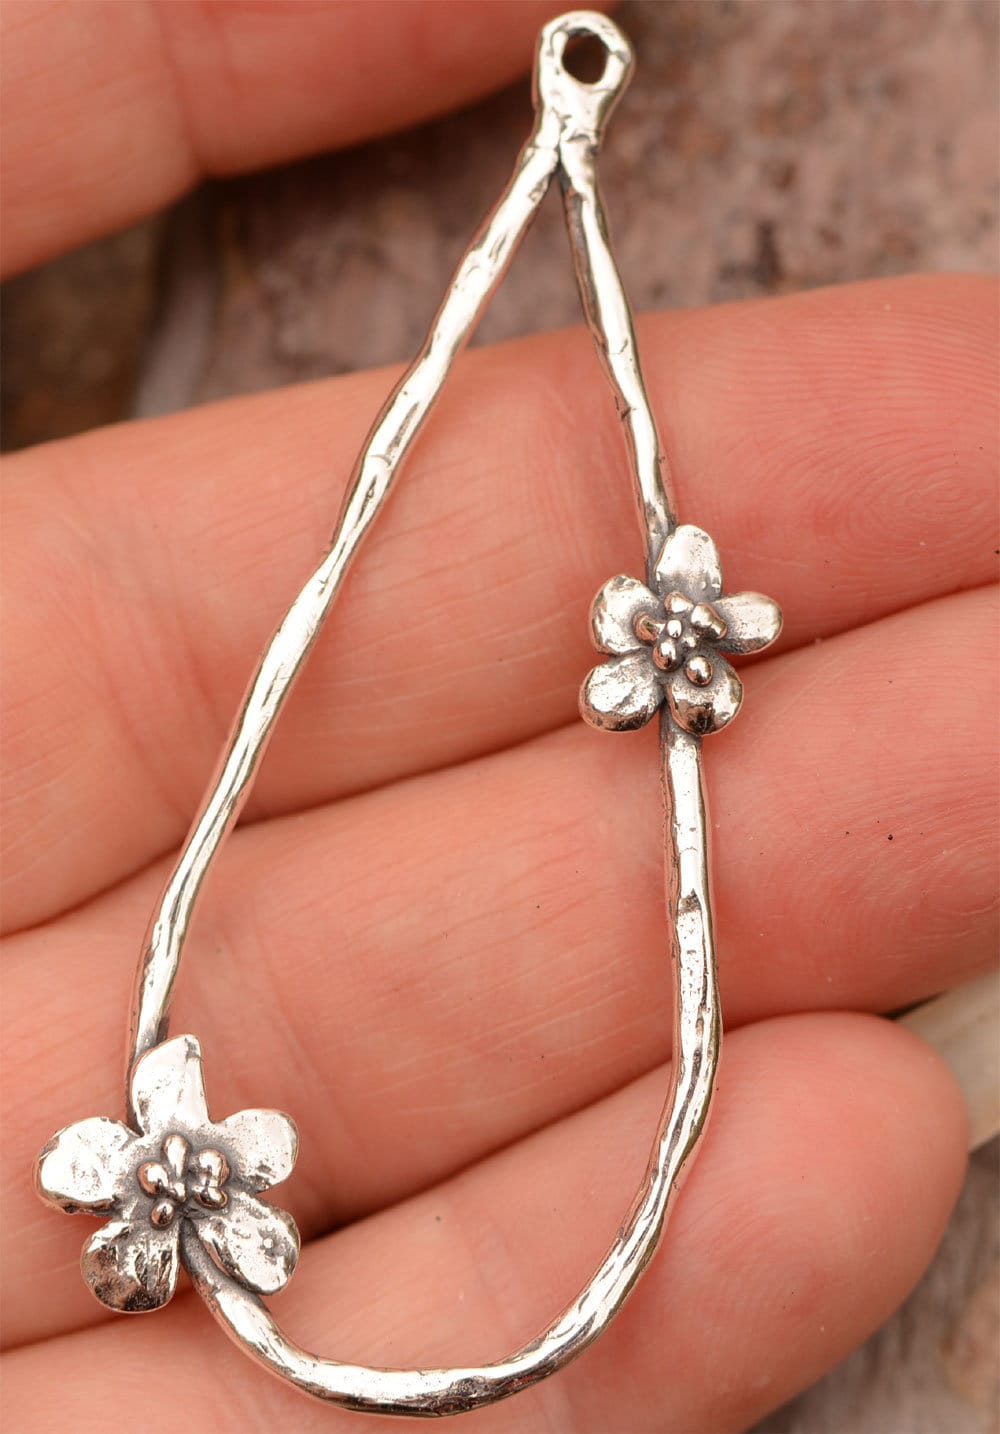 Charm Holder in Sterling Silver